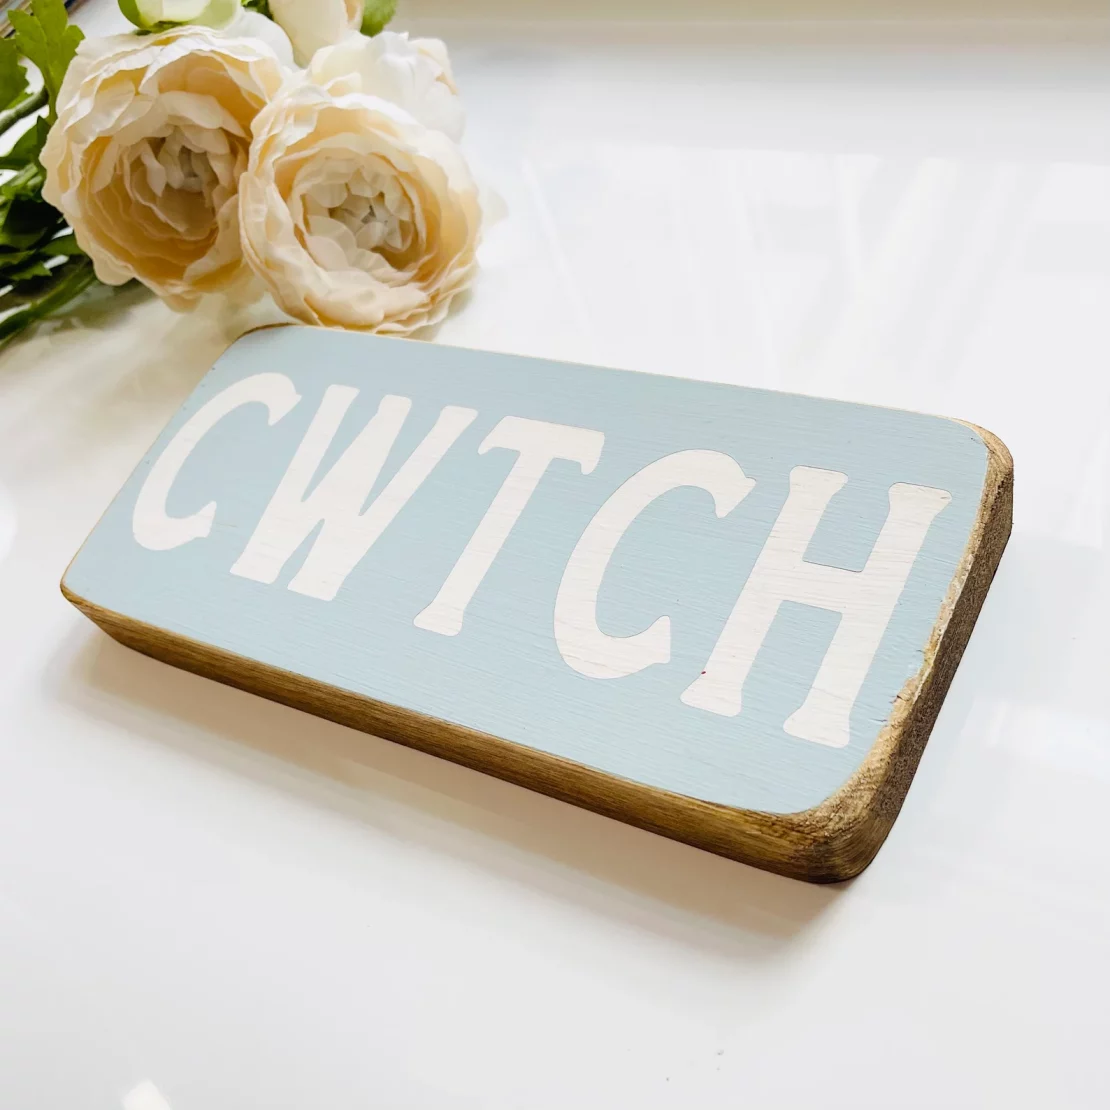 Cwtch sign from Longtide Studio